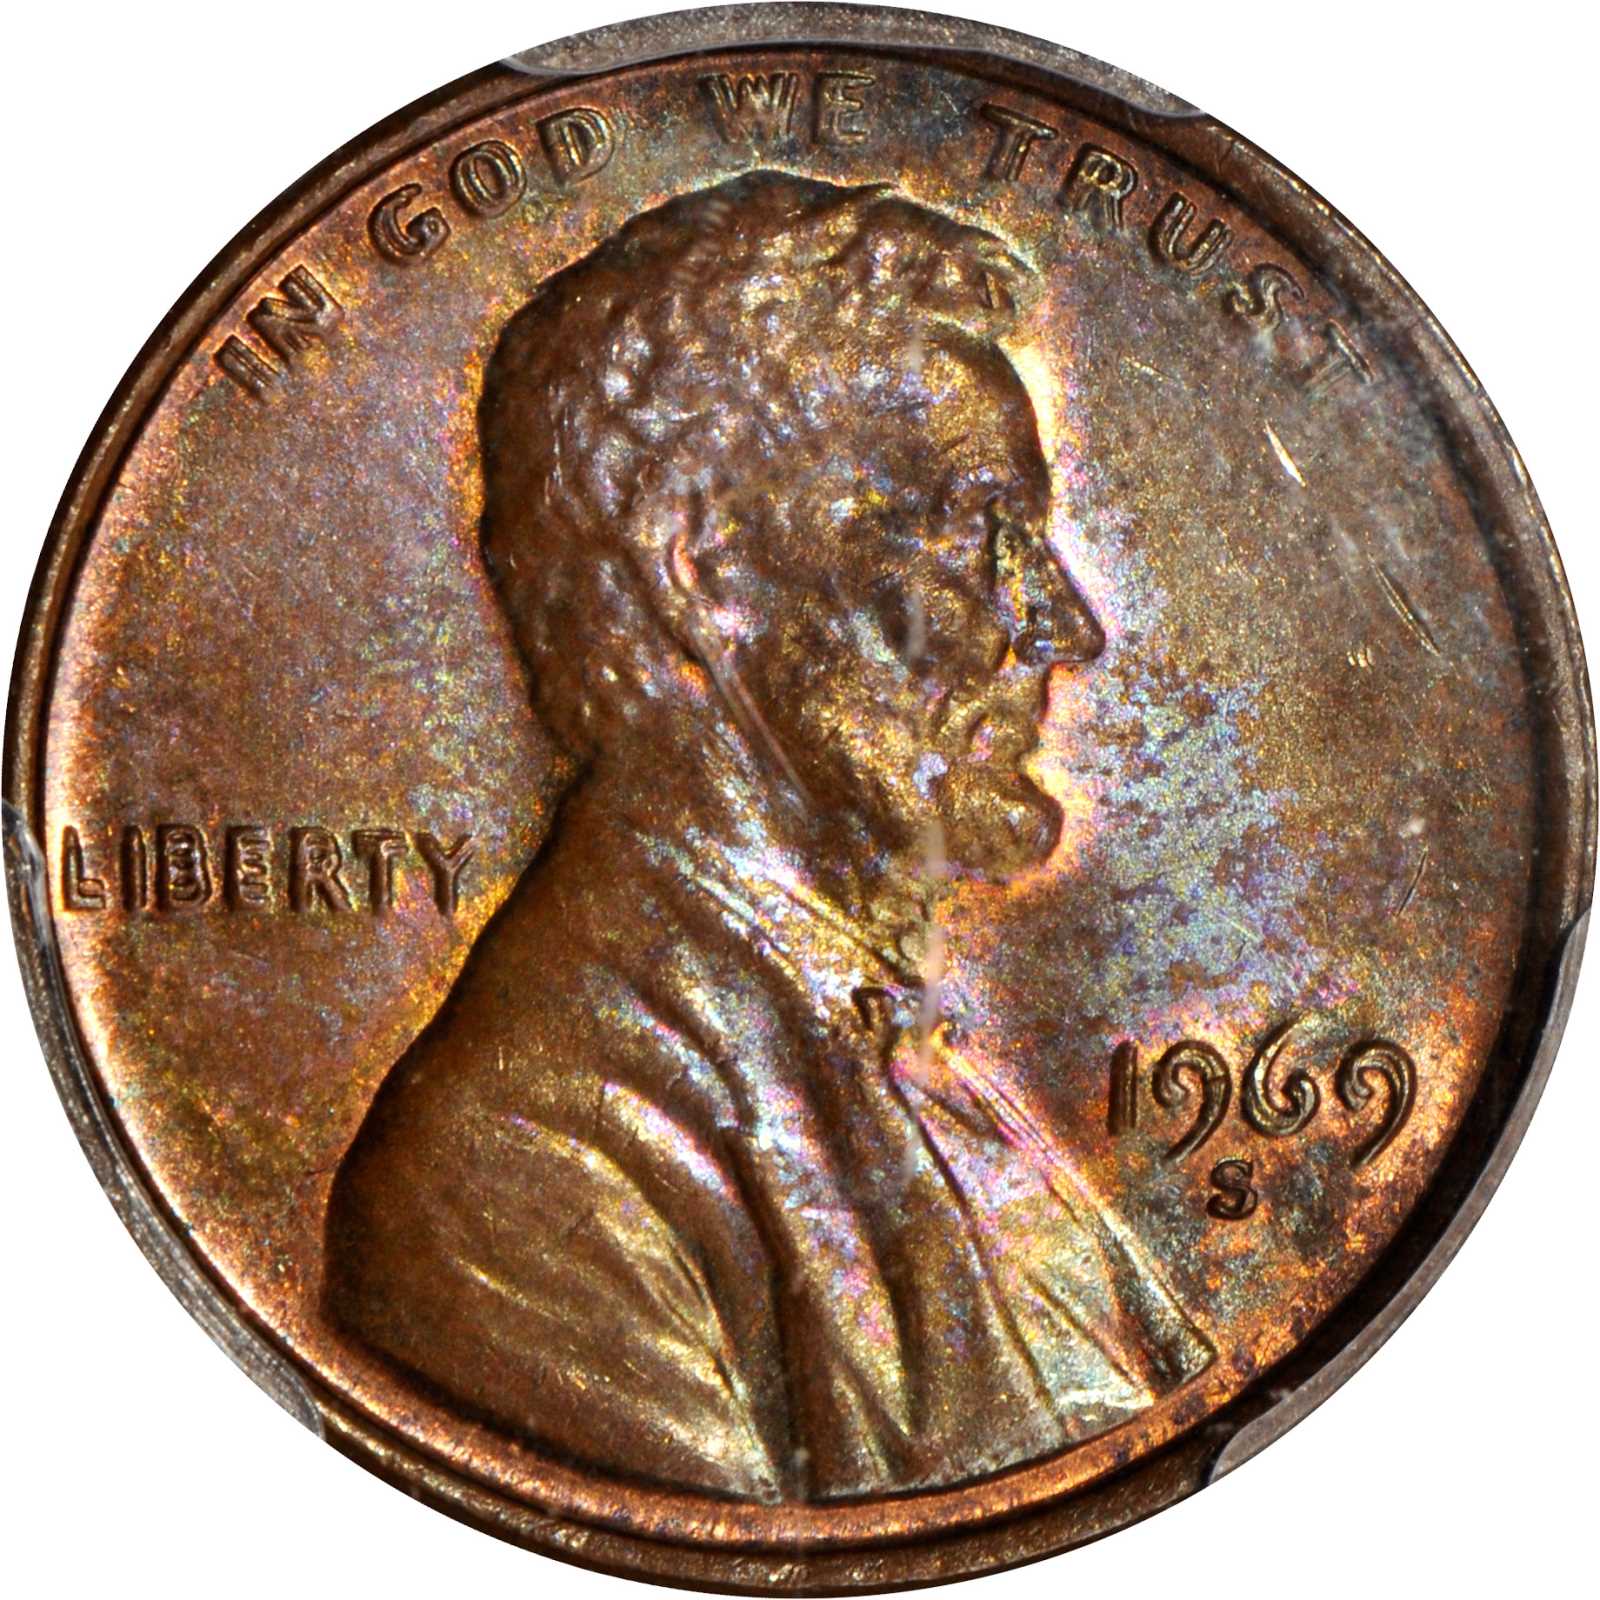 Texas mother finds 1969-S Lincoln, Doubled Die Obverse cent while roll  searching